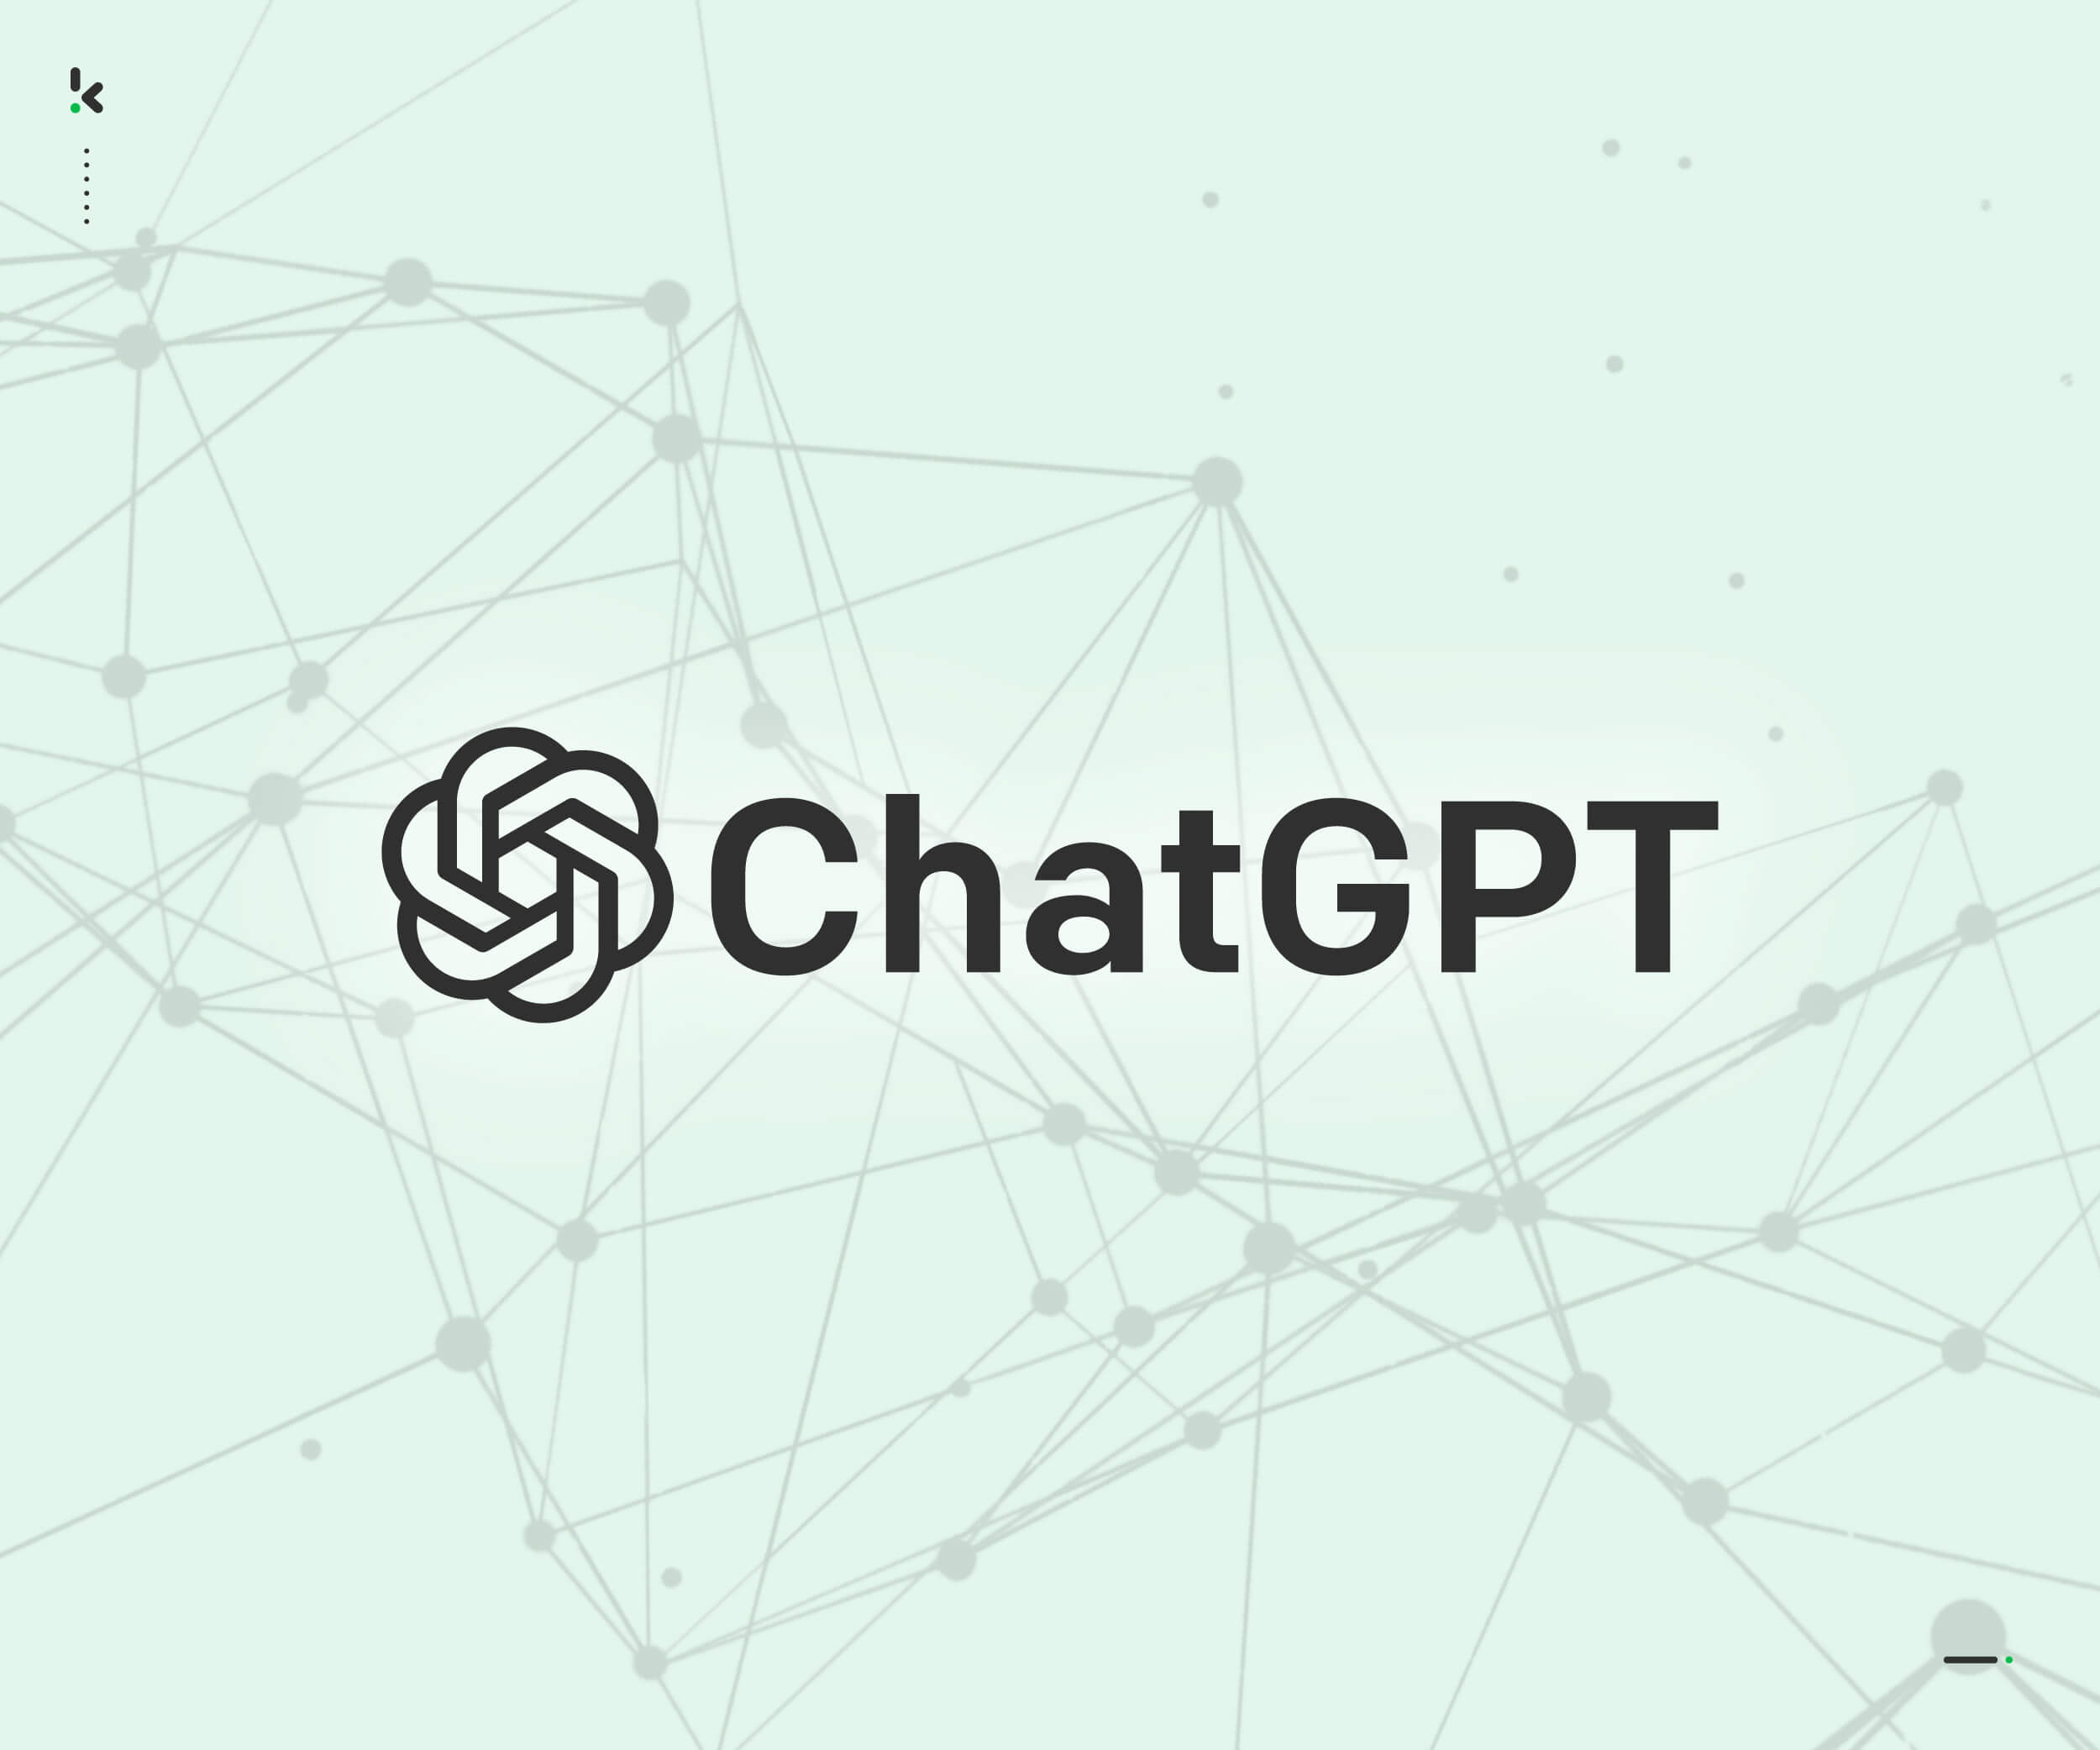 What is ChatGPT & Why Does it Matter to Your Business?